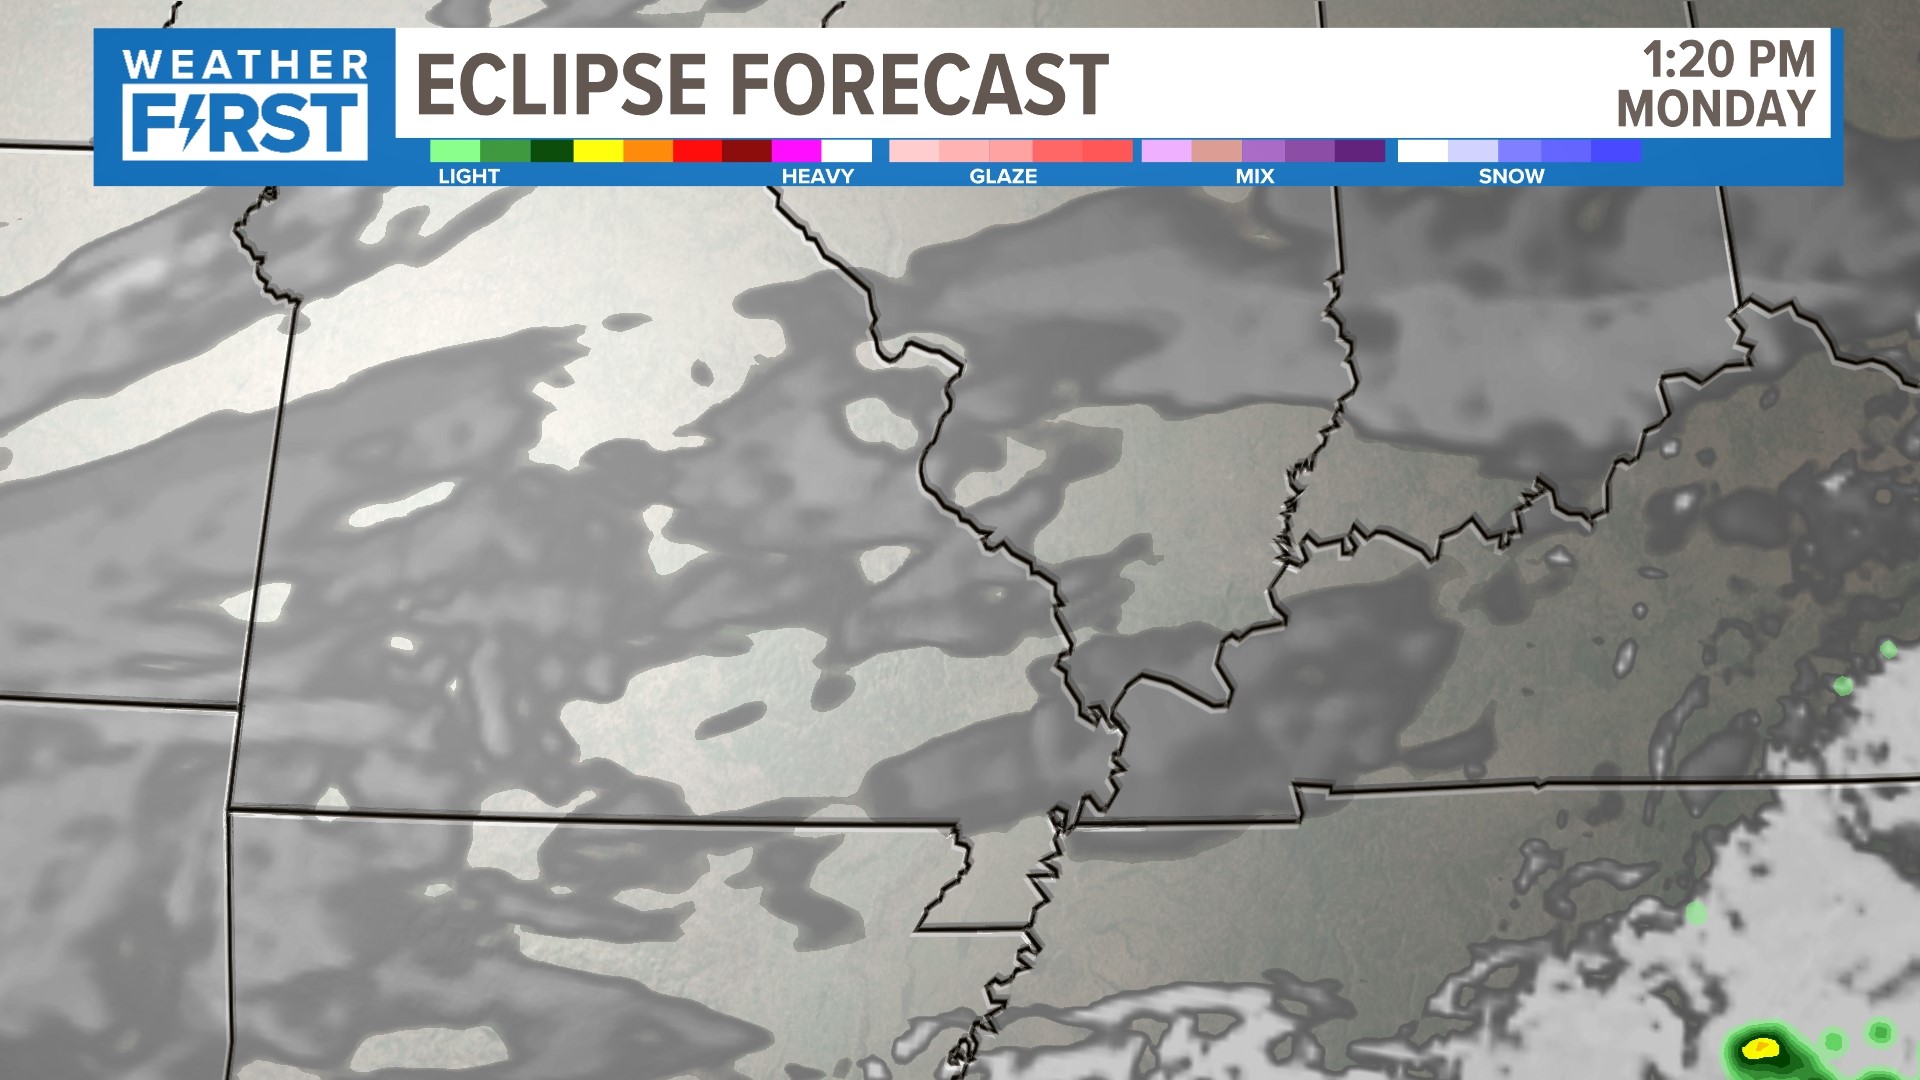 Missouri and Illinois Eclipse Cloud Cover Forecast